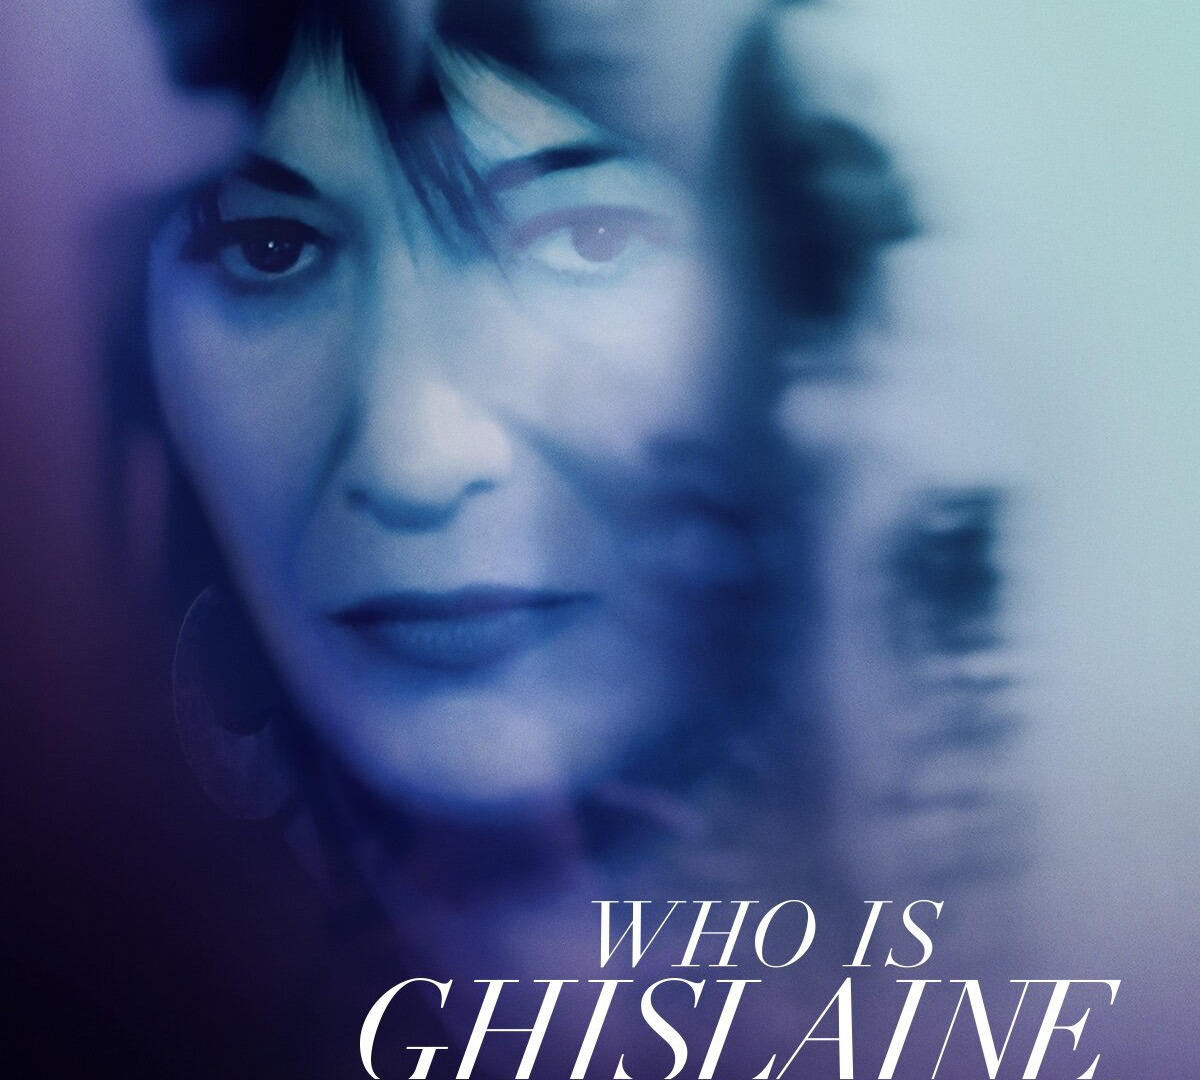 Show Who Is Ghislaine Maxwell?